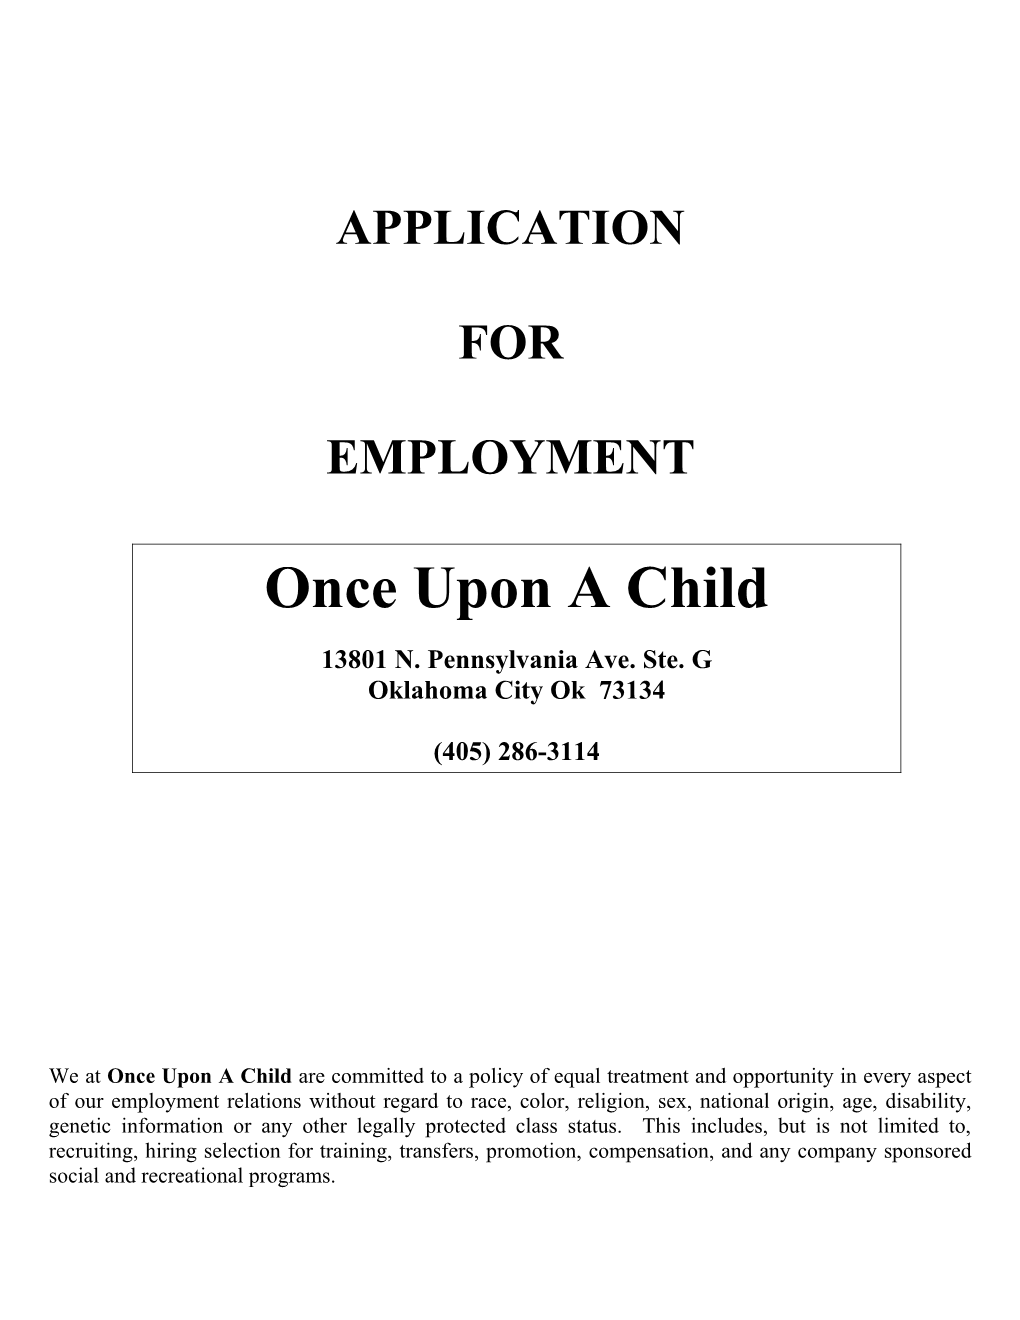 We at Once Upon a Child Are Committed to a Policy of Equal Treatment and Opportunity In